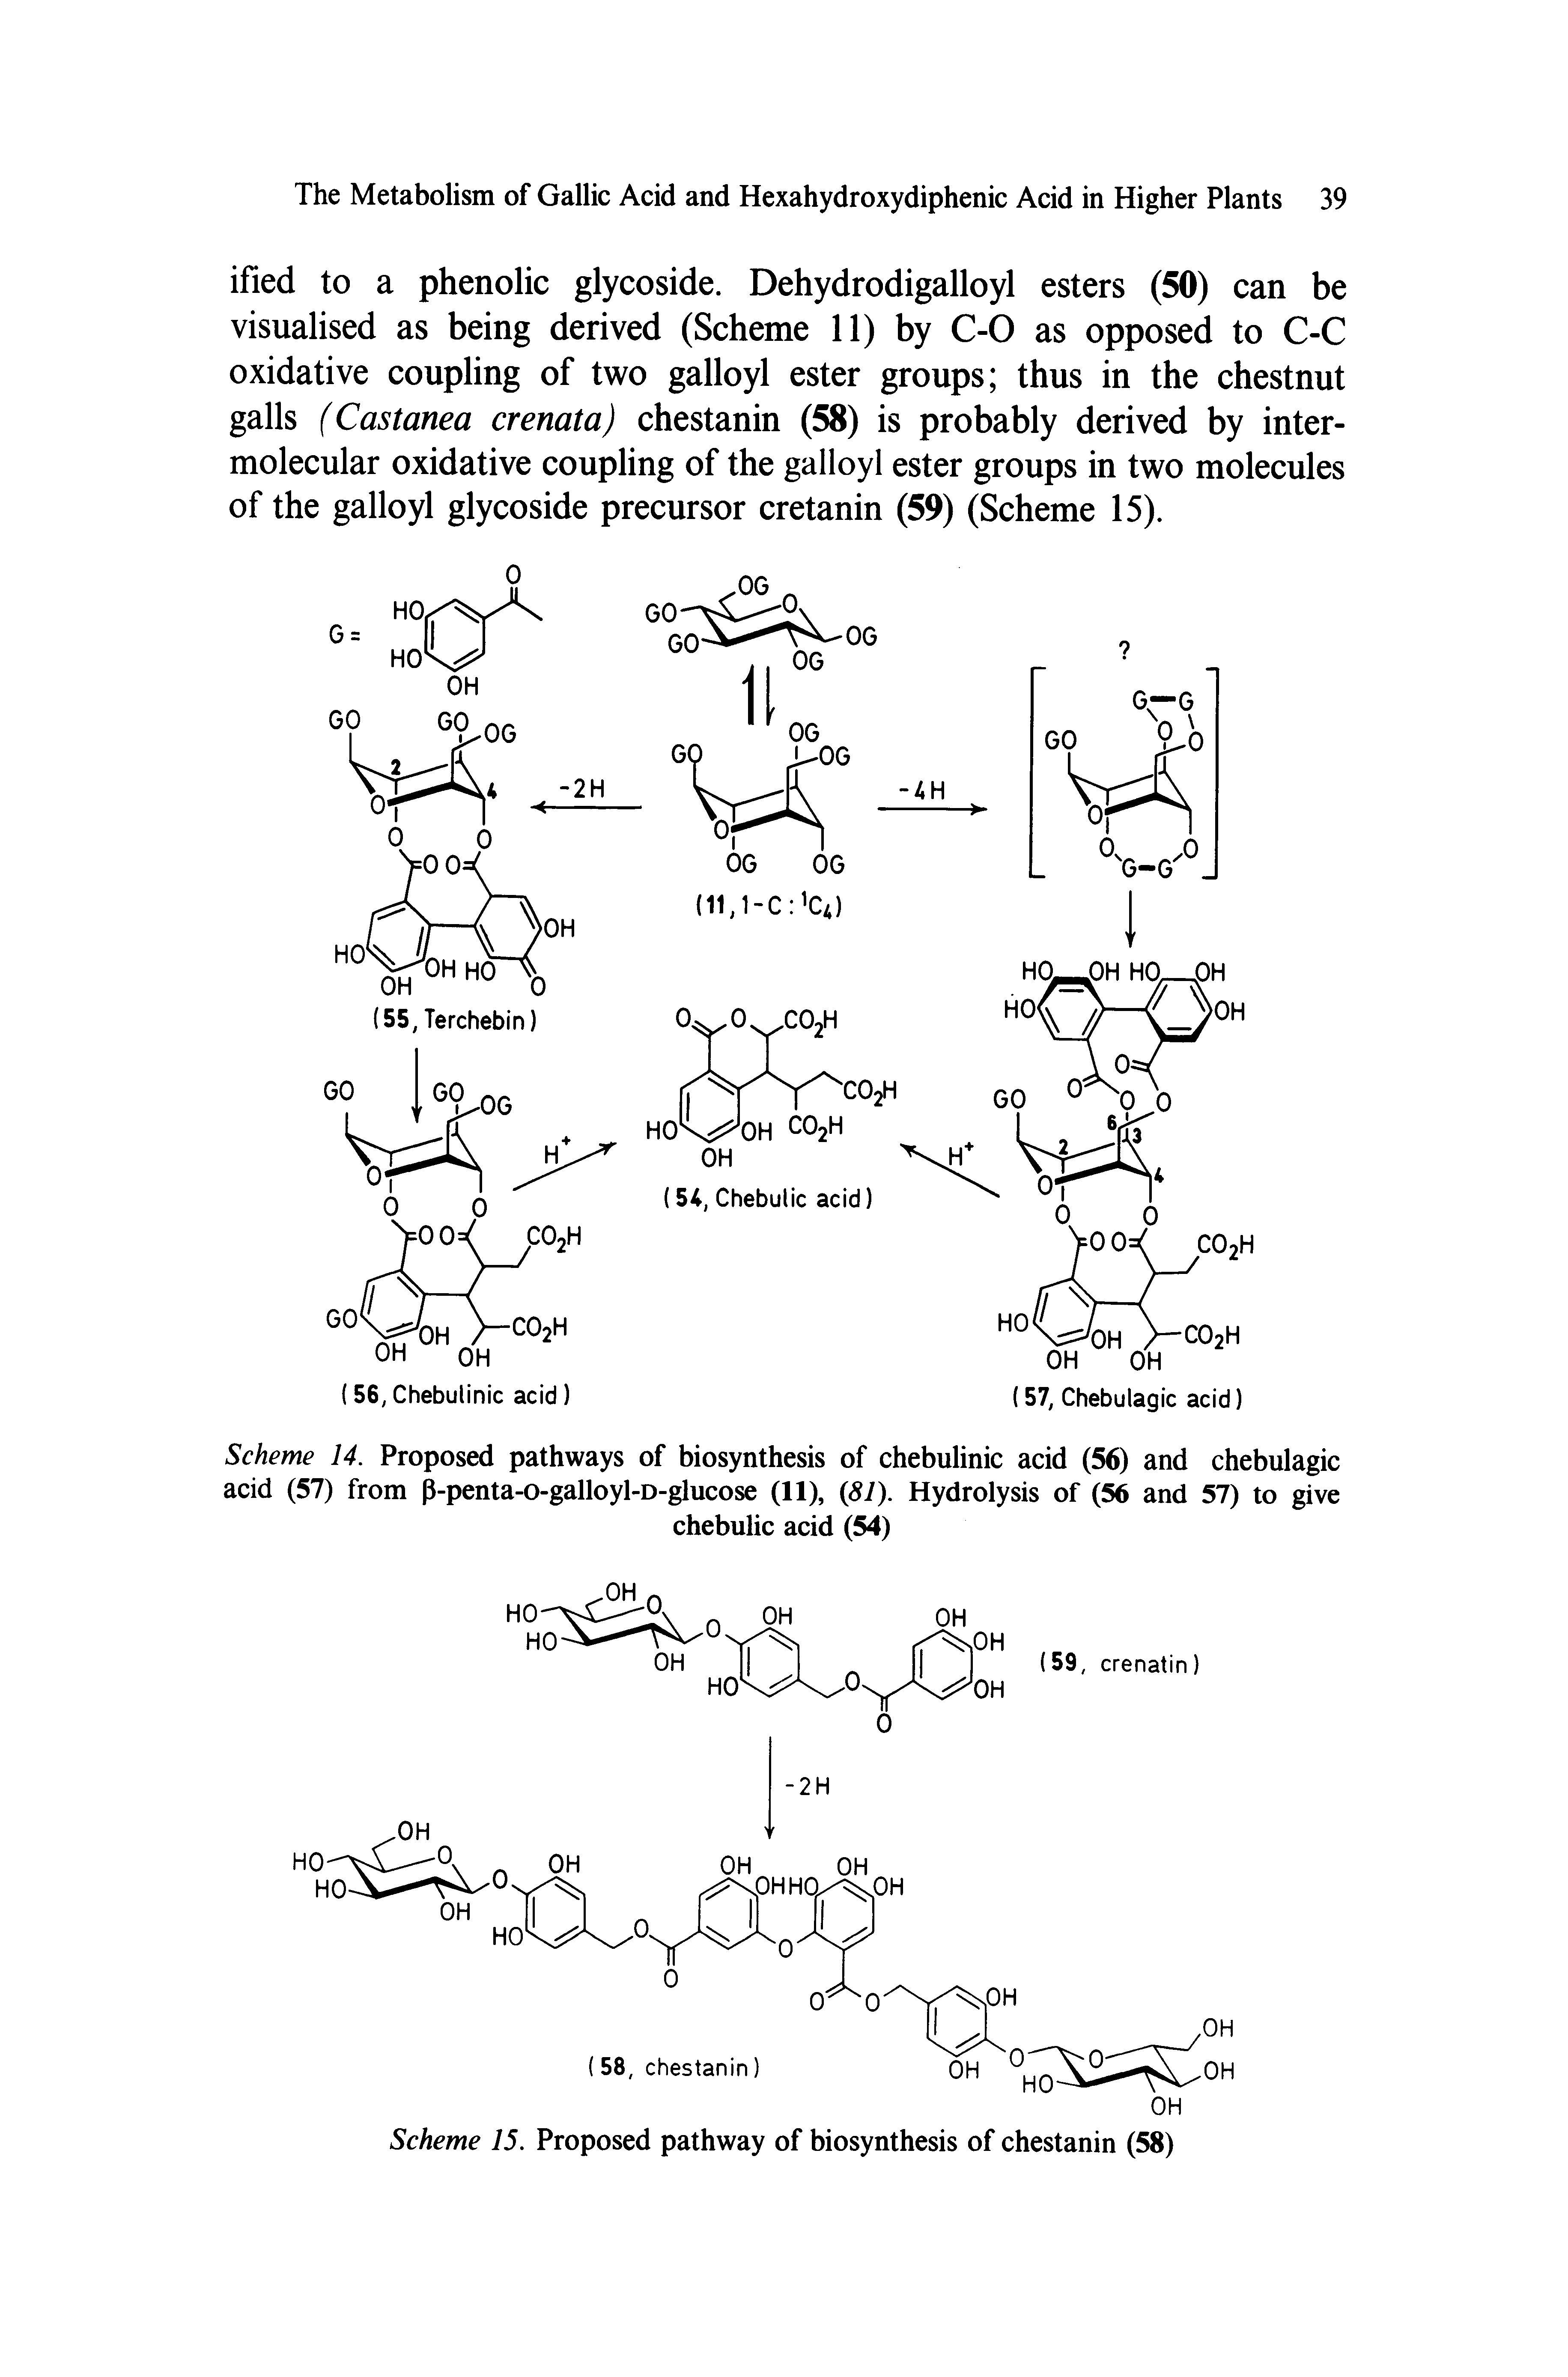 Scheme 14. Proposed pathways of biosynthesis of chebulinic acid (56) and chebulagic acid (57) from P-penta-o-galloyl-D-glucose (11), 81). Hydrolysis of (56 and 57) to give...